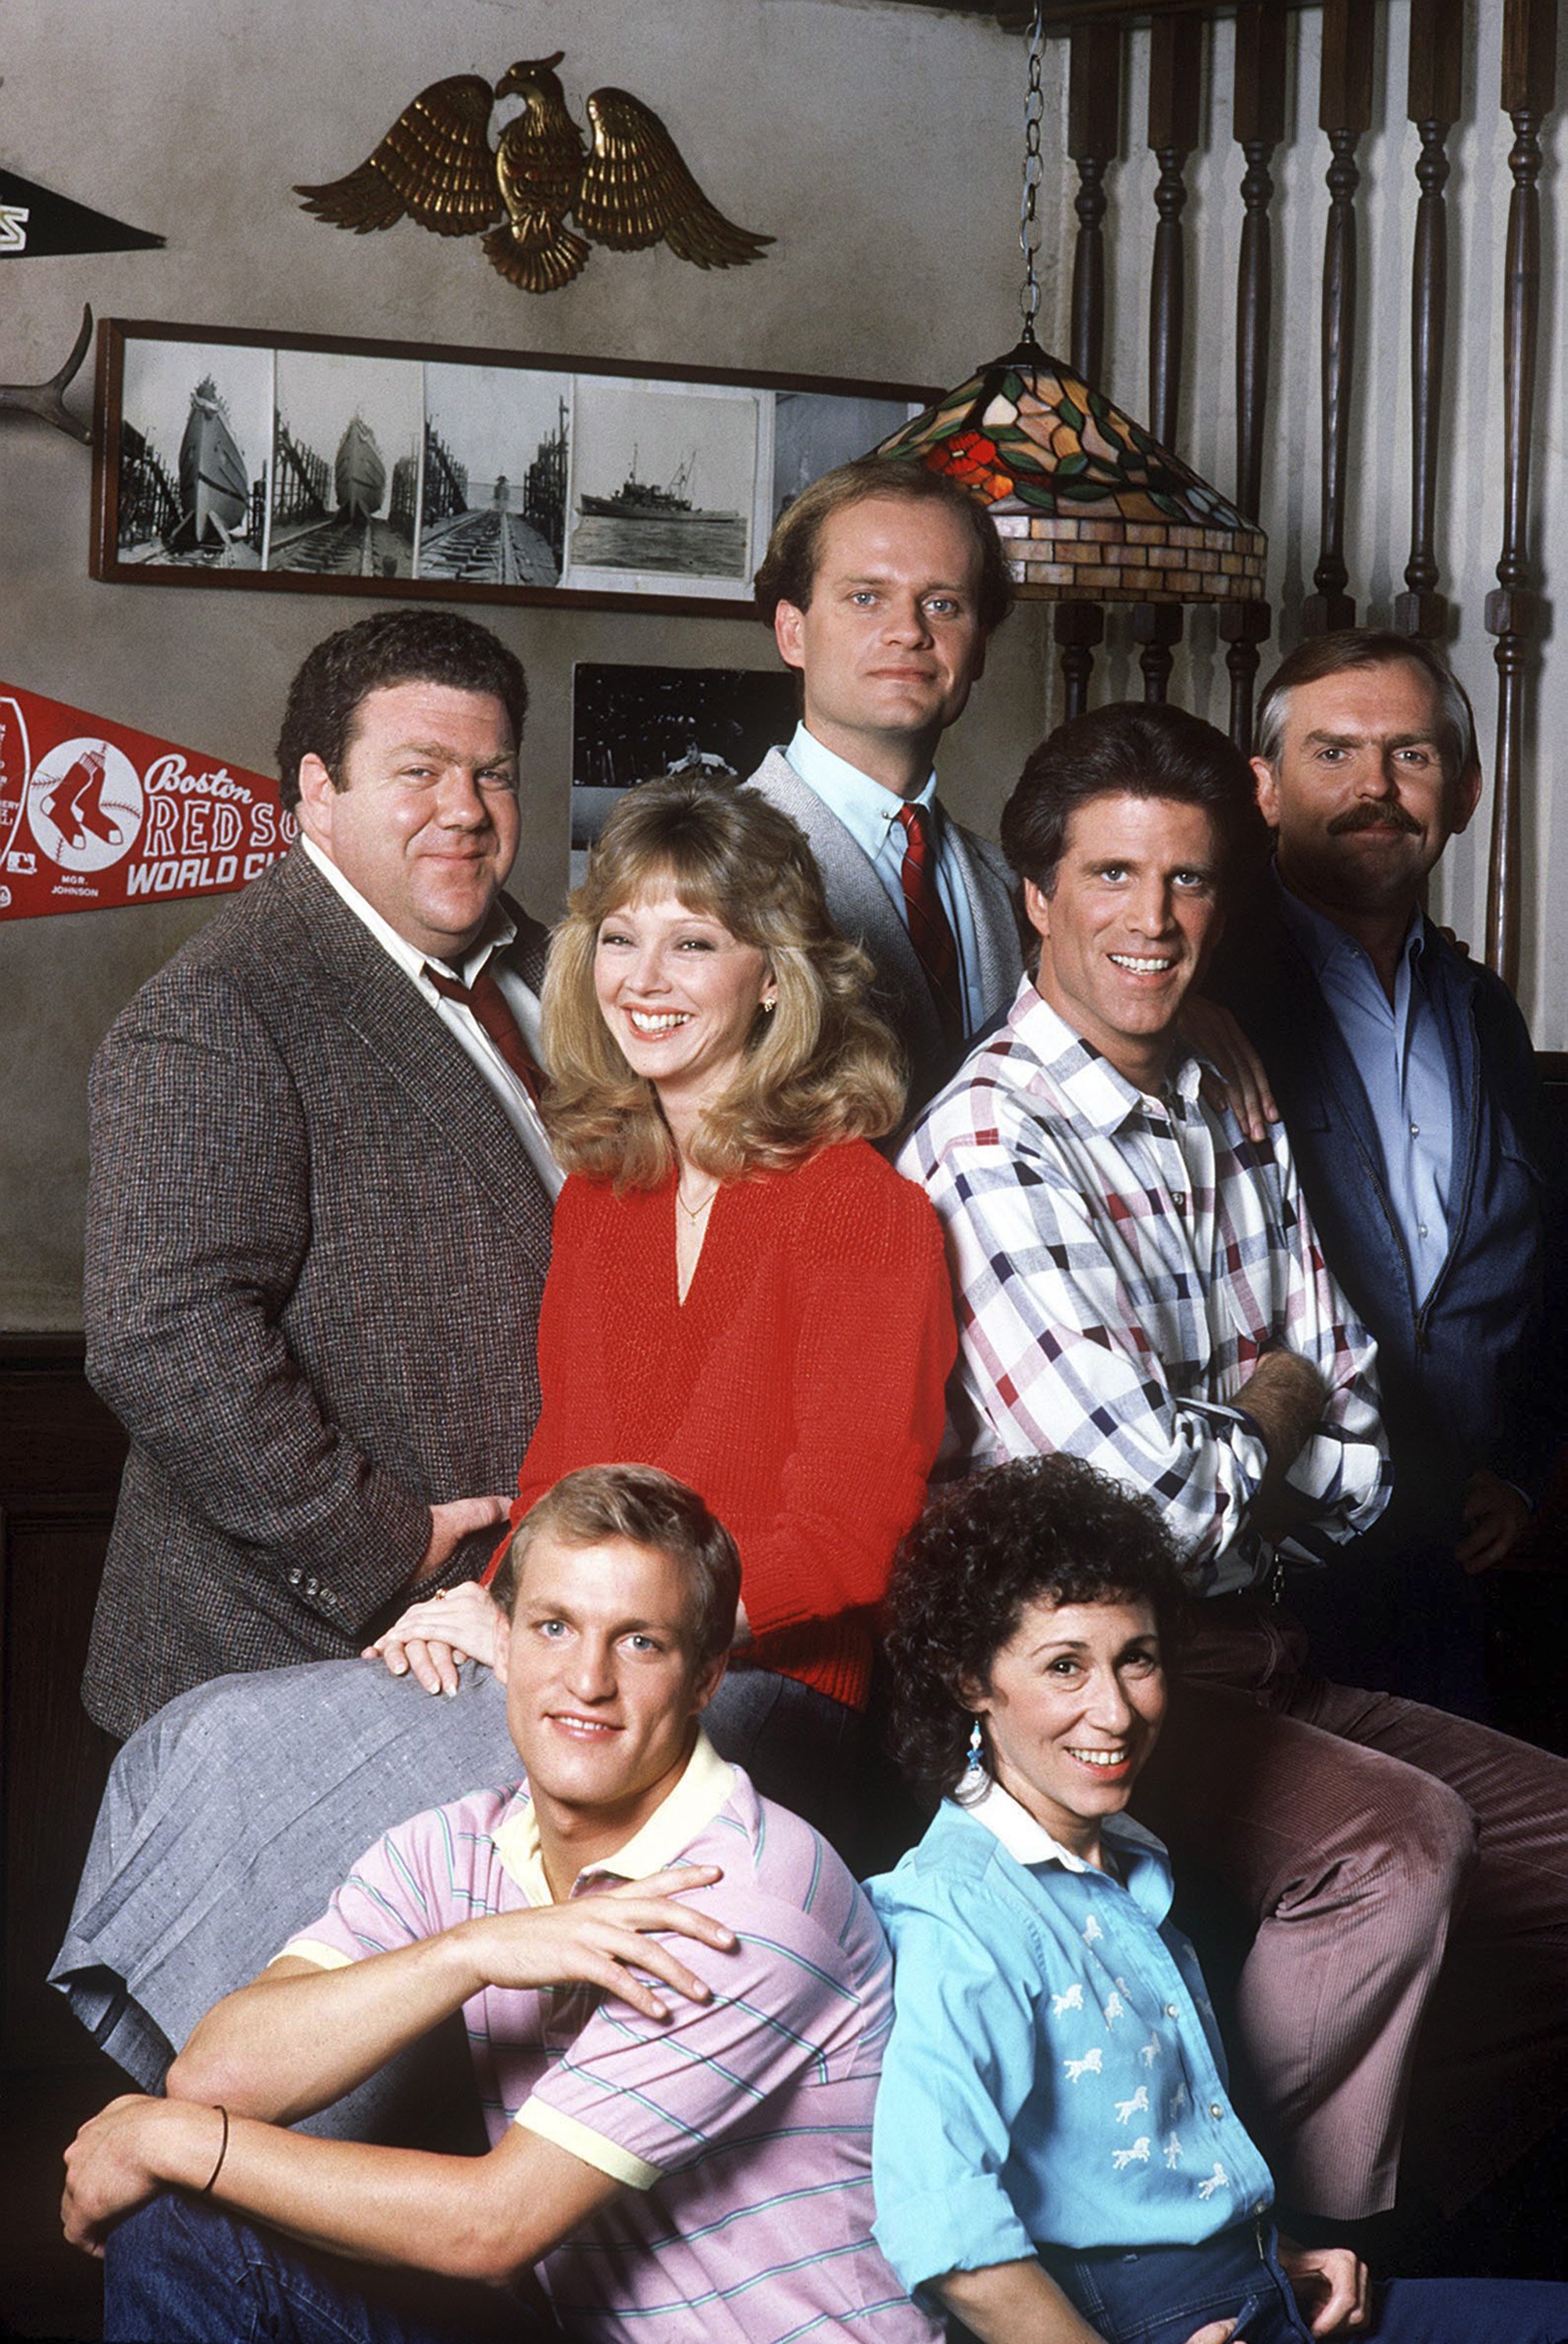 Pictured: (top) Kelsey Grammer as Dr. Frasier Crane, (middle) George Wendt as Norm Peterson, Shelley Long as Diane Chambers, Ted Danson as Sam Malone, John Ratzenberger as Cliff Clavin, (bottom) Woody Harrelson as Woody Boyd, and Rhea Perlman as Carla Lozupone Tortelli LeBec | Source: Getty Images